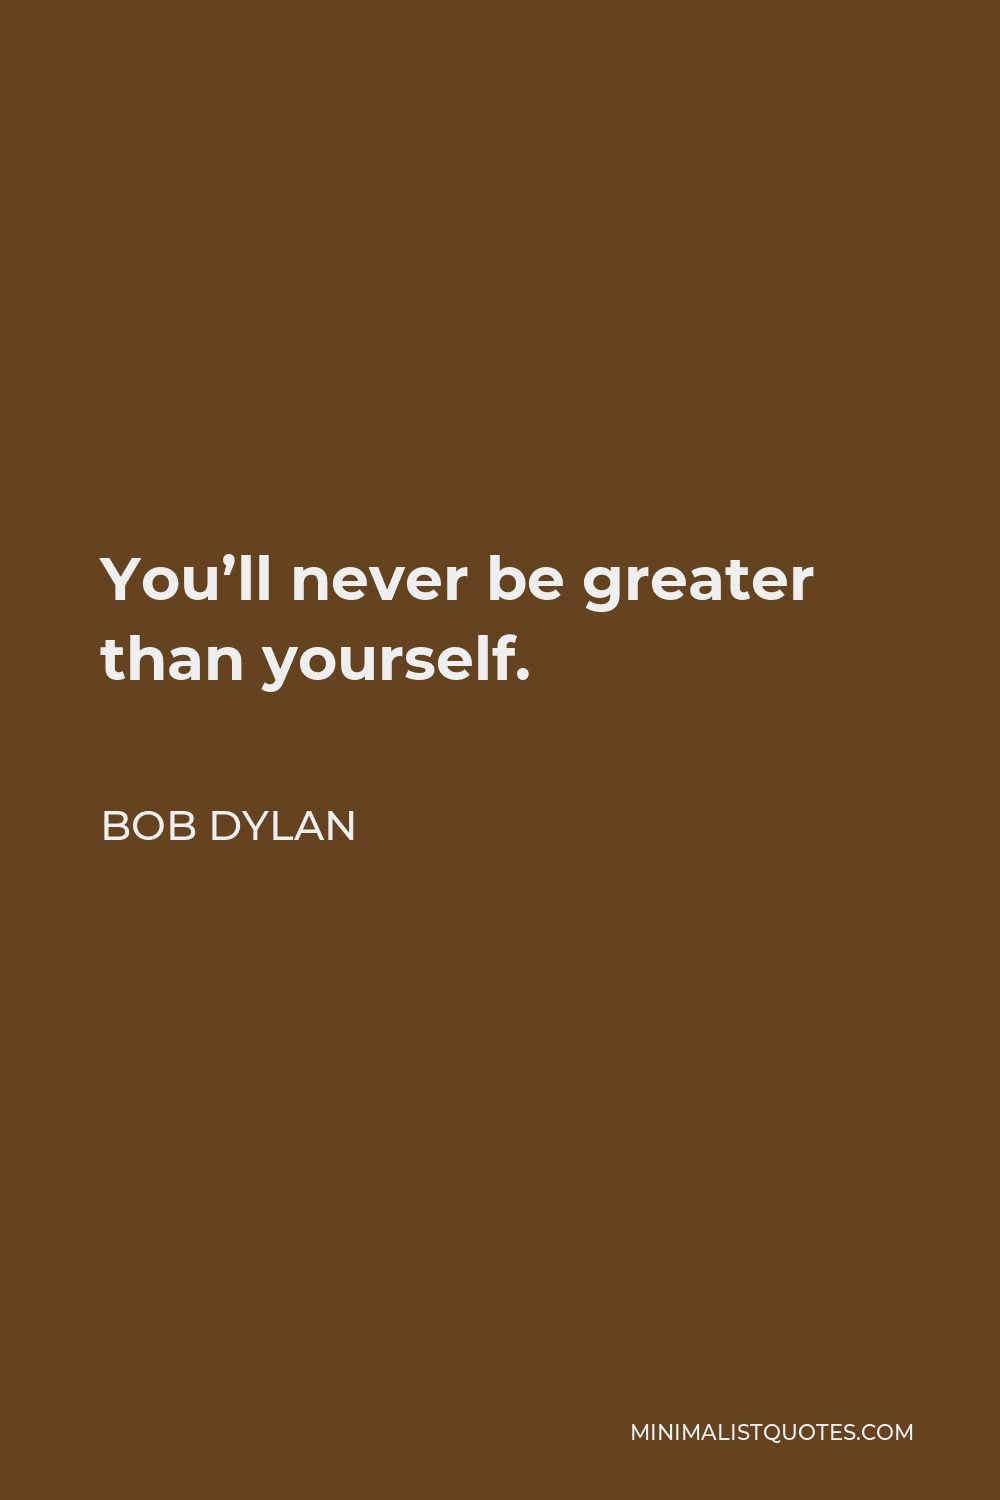 Bob Dylan Quote - You’ll never be greater than yourself.